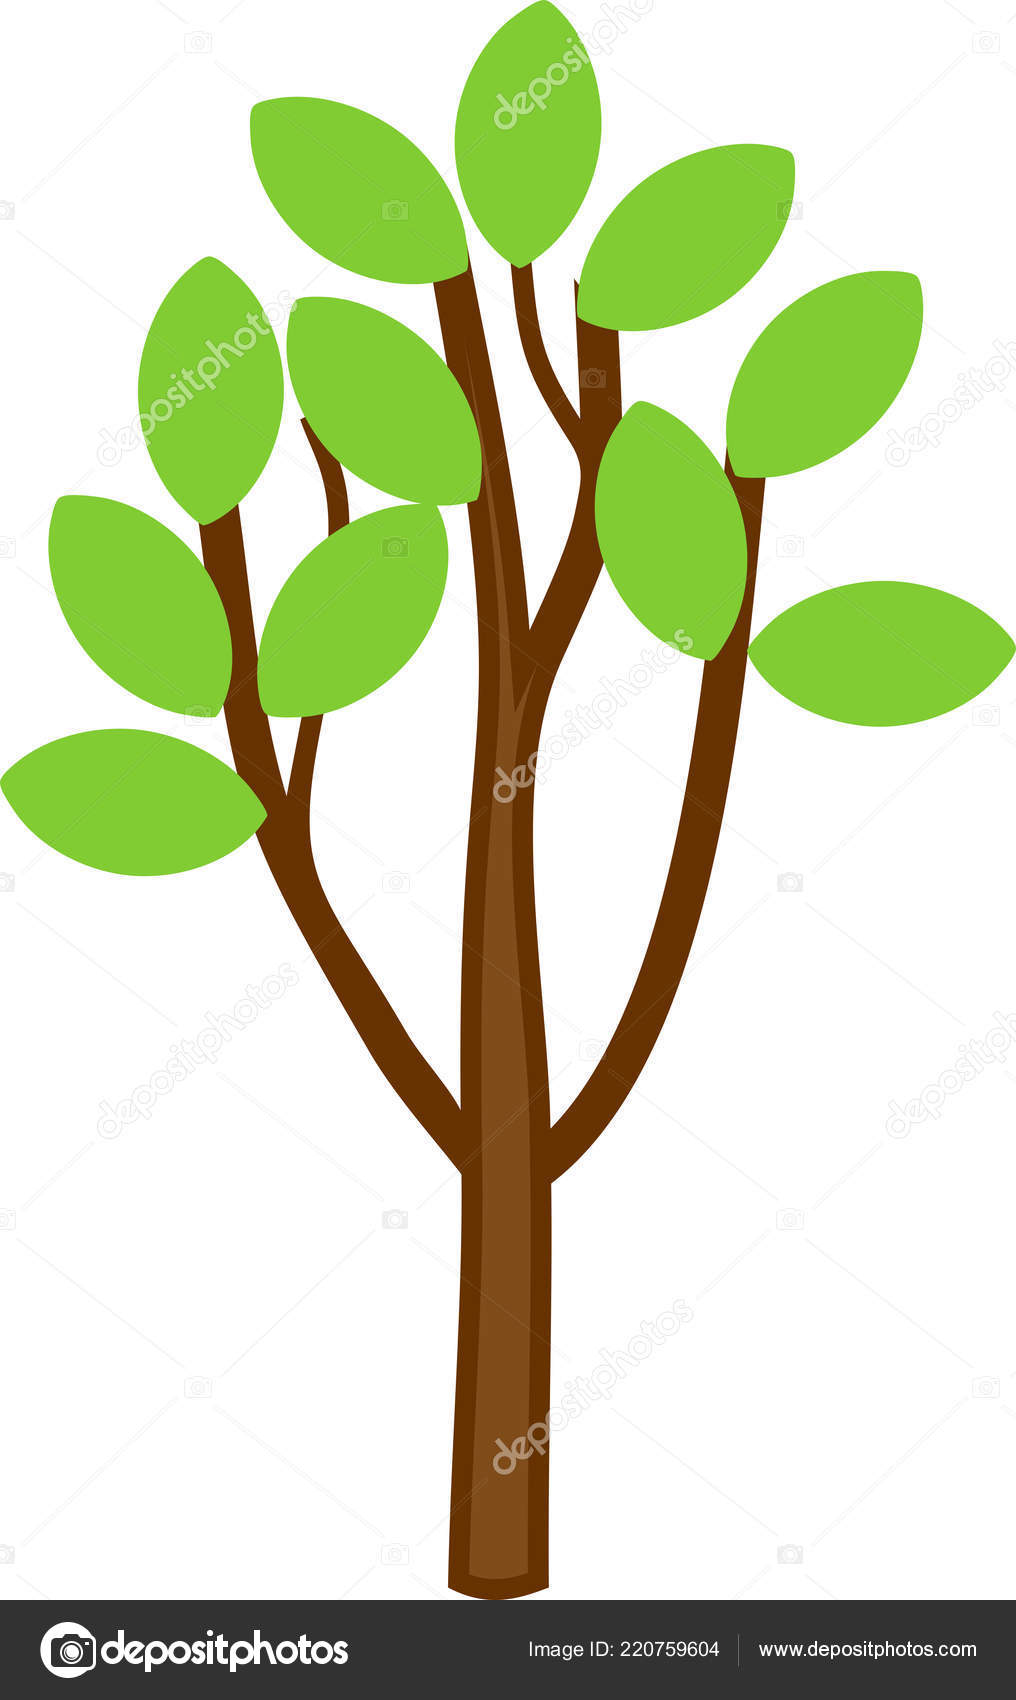 Young Cartoon Deciduous Tree Branched Crown Green Leaves Branches Isolated Vector Image By C Mariaflaya Vector Stock